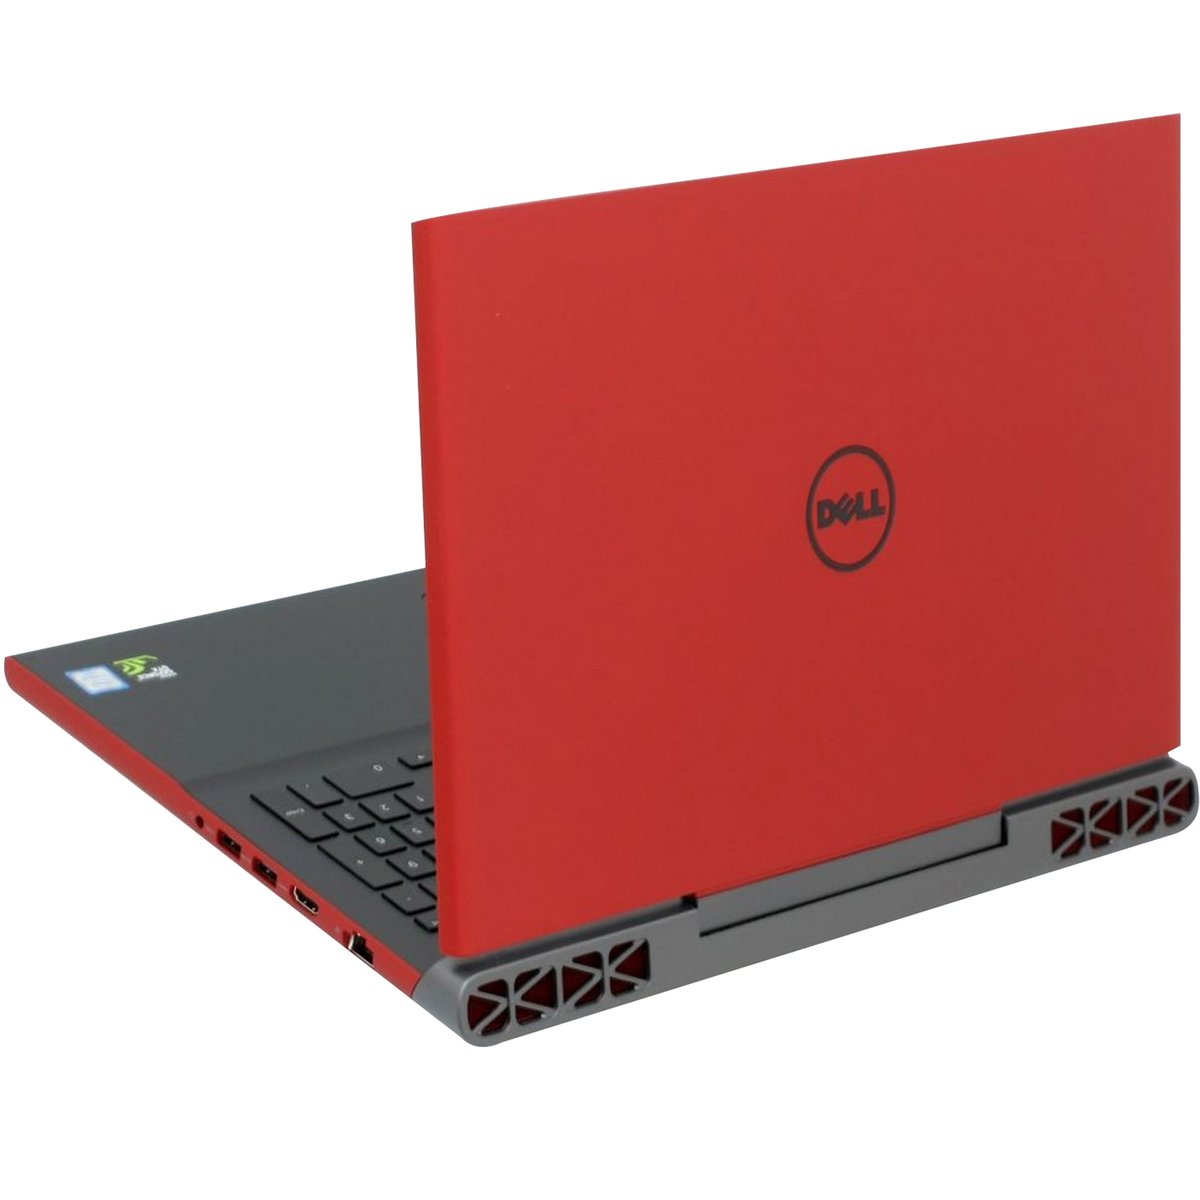 Dell Gaming Notebook inspiron 7567-1056 Core i5 Red